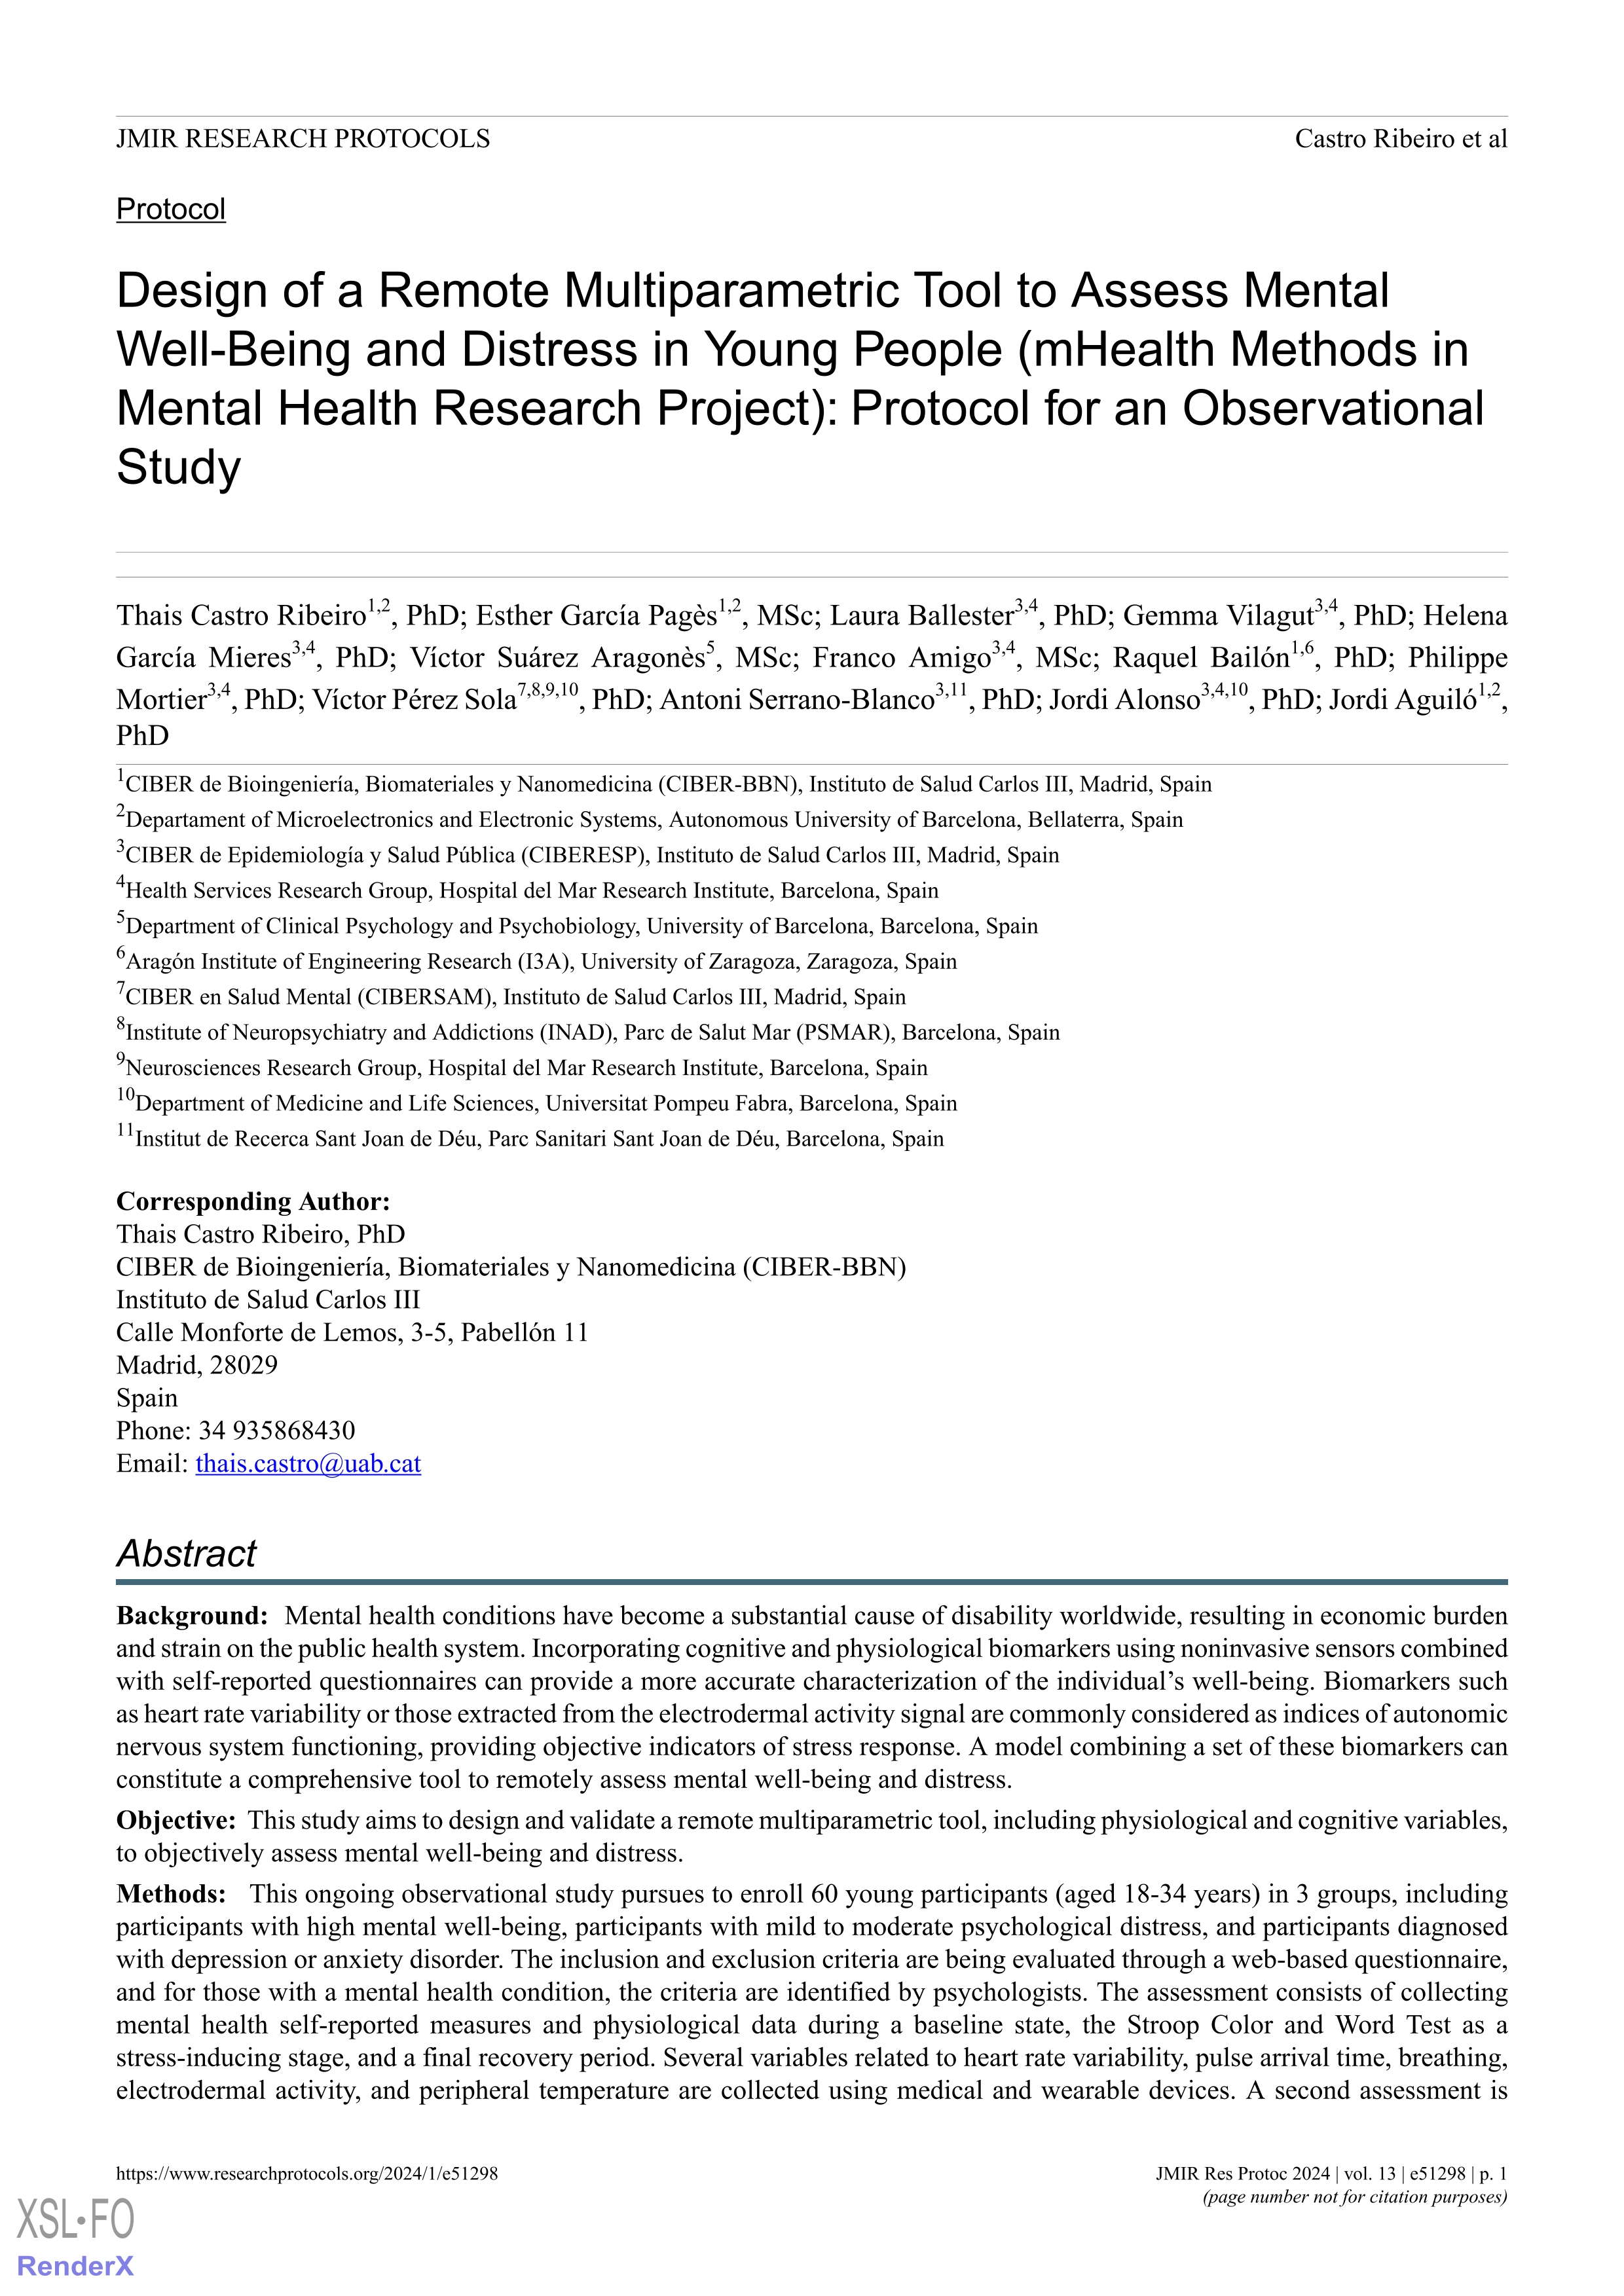 Design of a remote multiparametric tool to assess mental well-being and distress in young people (mhealth methods in mental health research project): protocol for an observational study